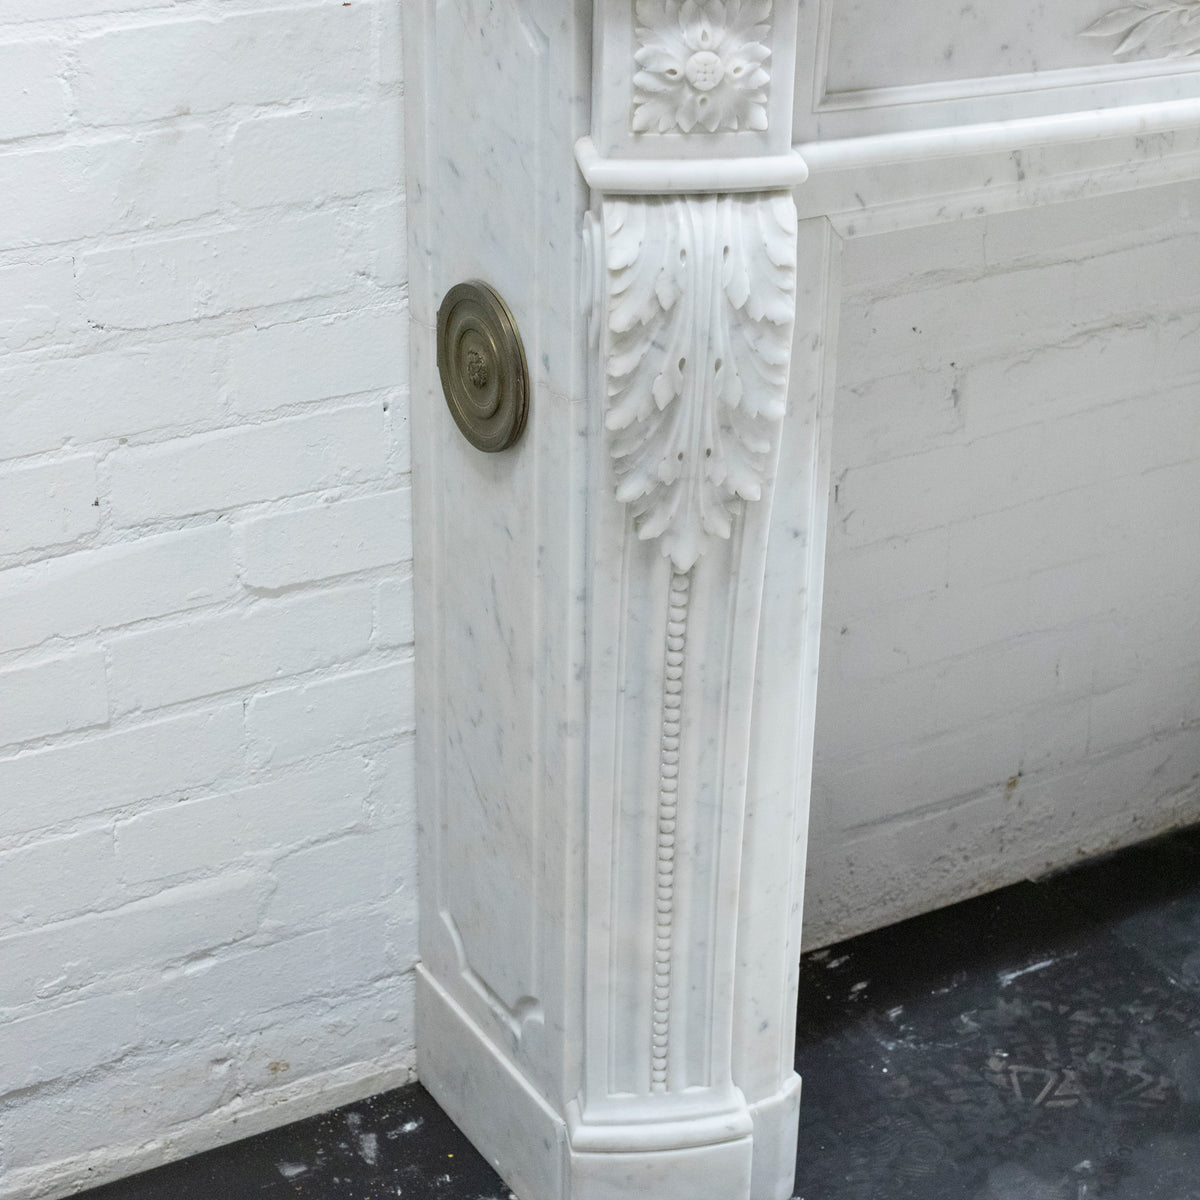 Antique Louis XVI Style Carved Marble Fireplace in Carrara Marble (Pair Available) | The Architectural Forum